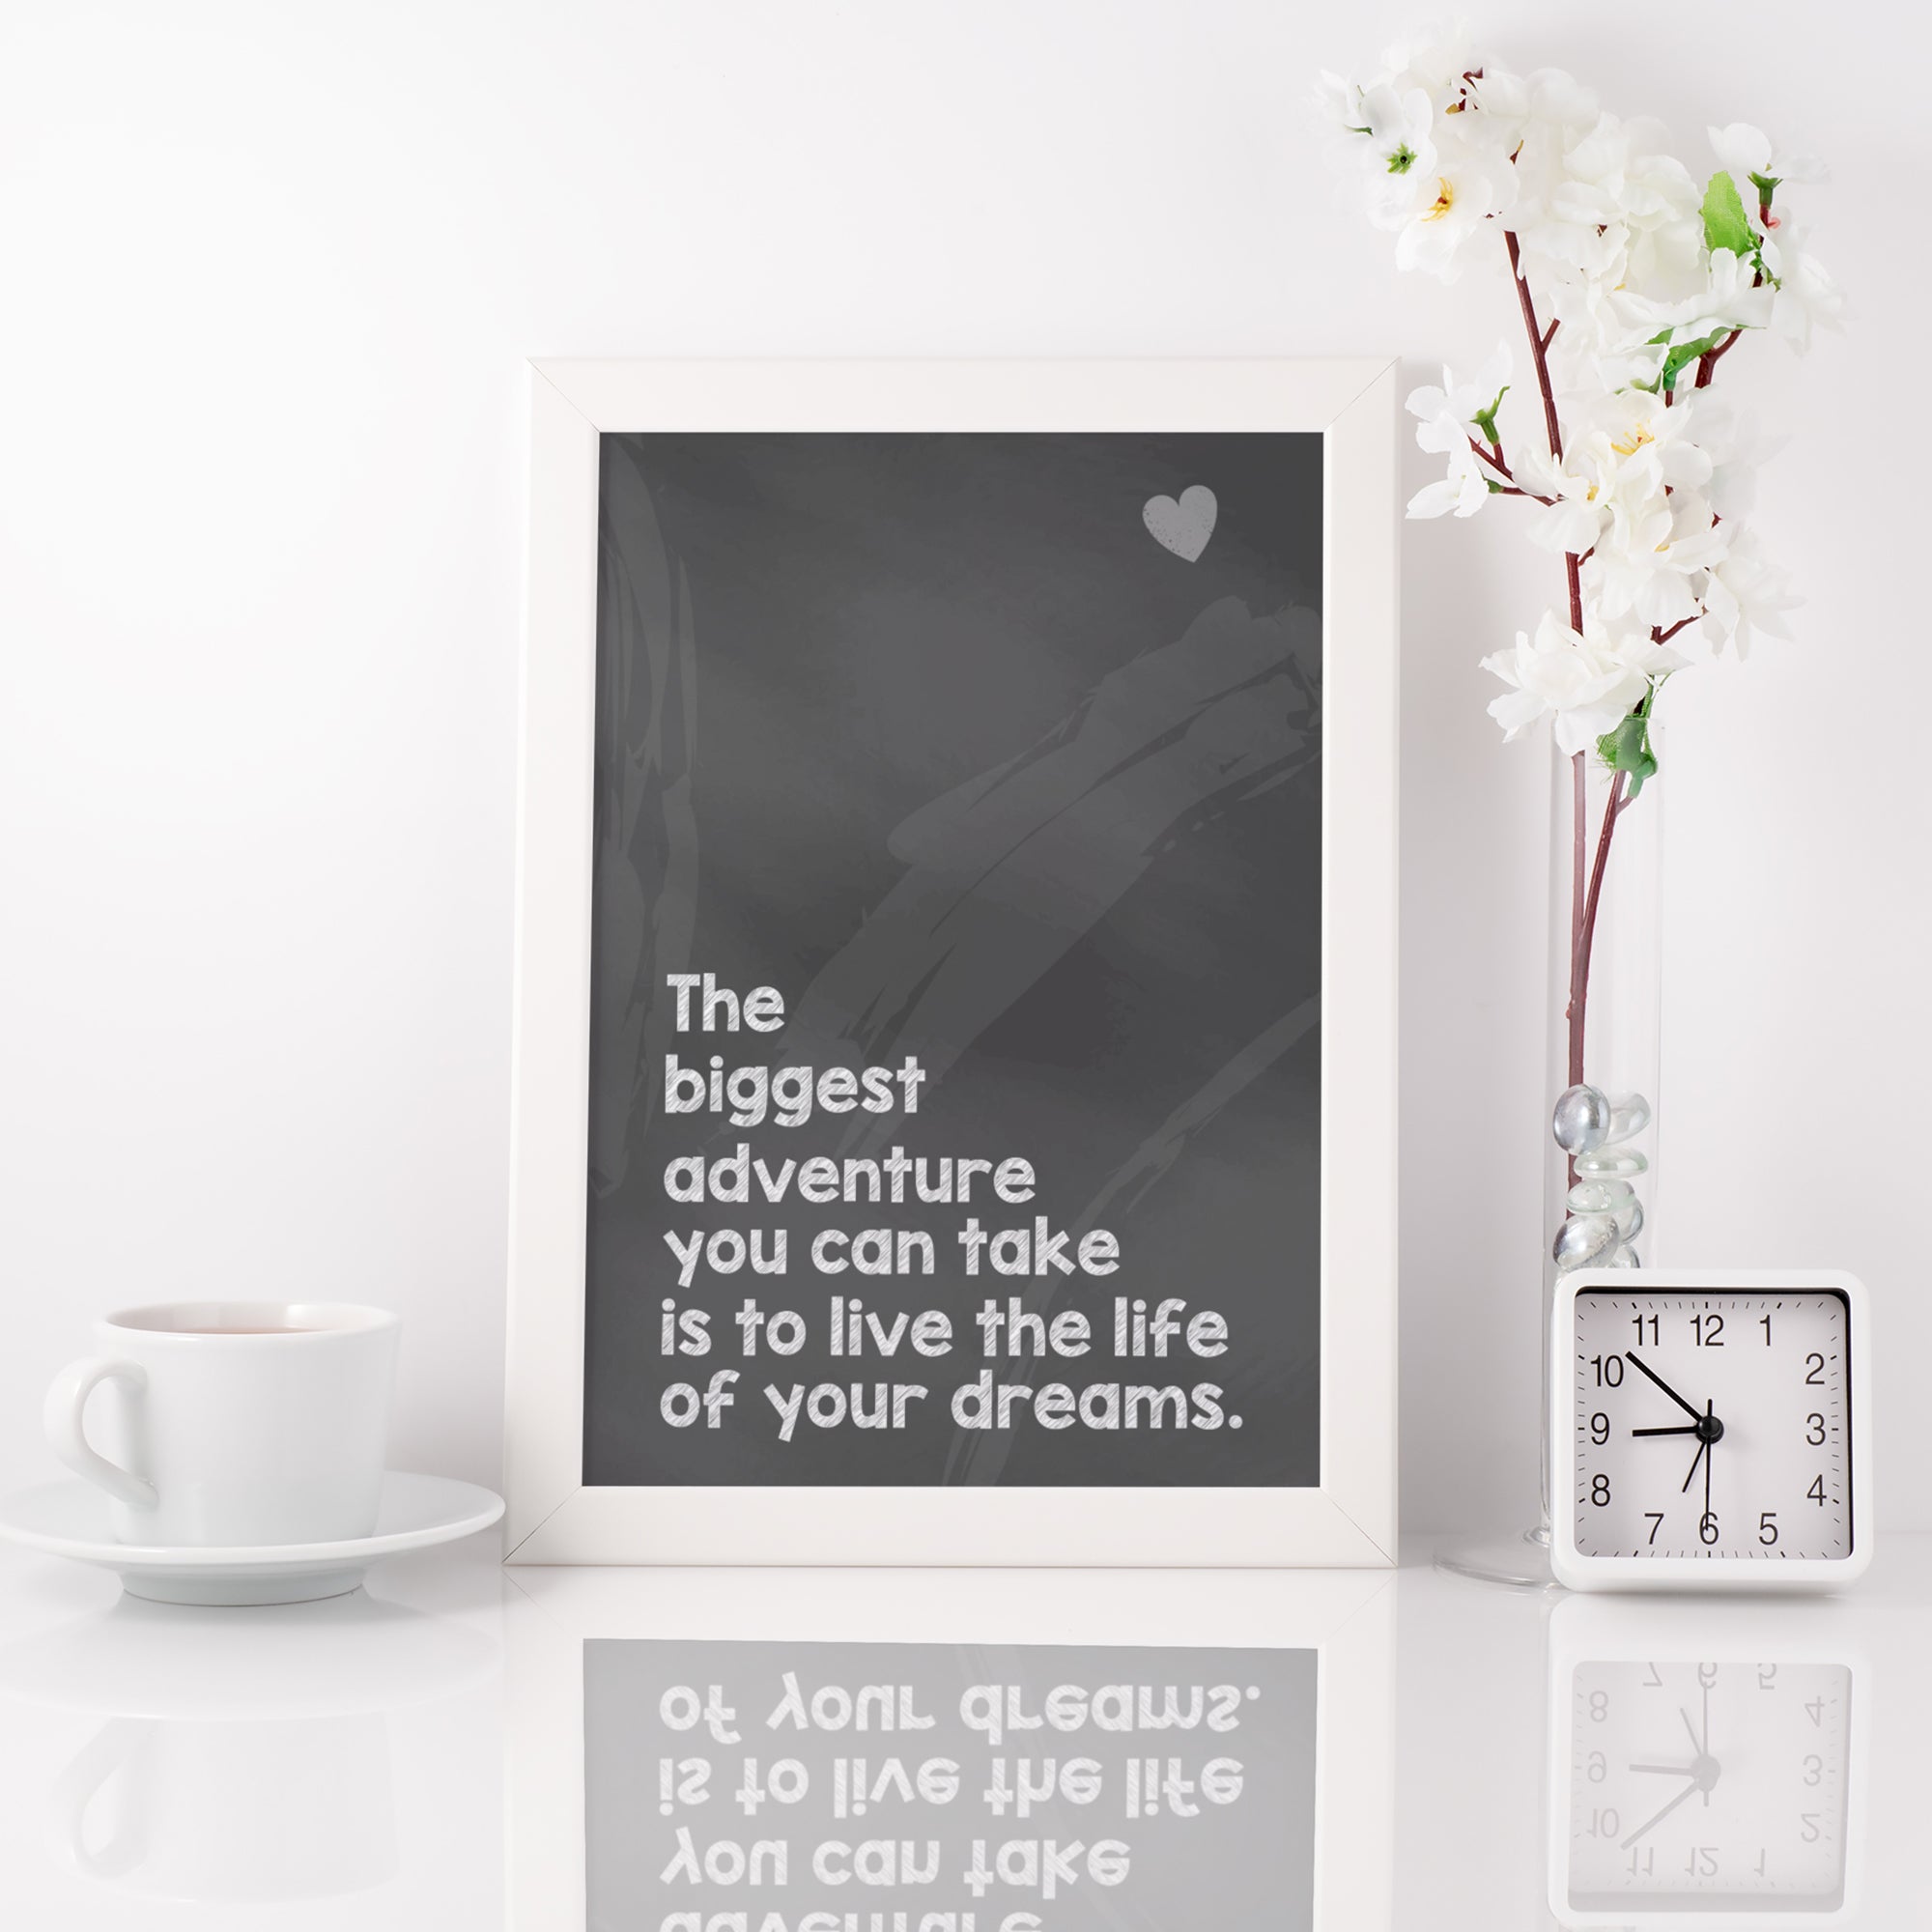 The Biggest Adventure Framed Travel Quote Poster